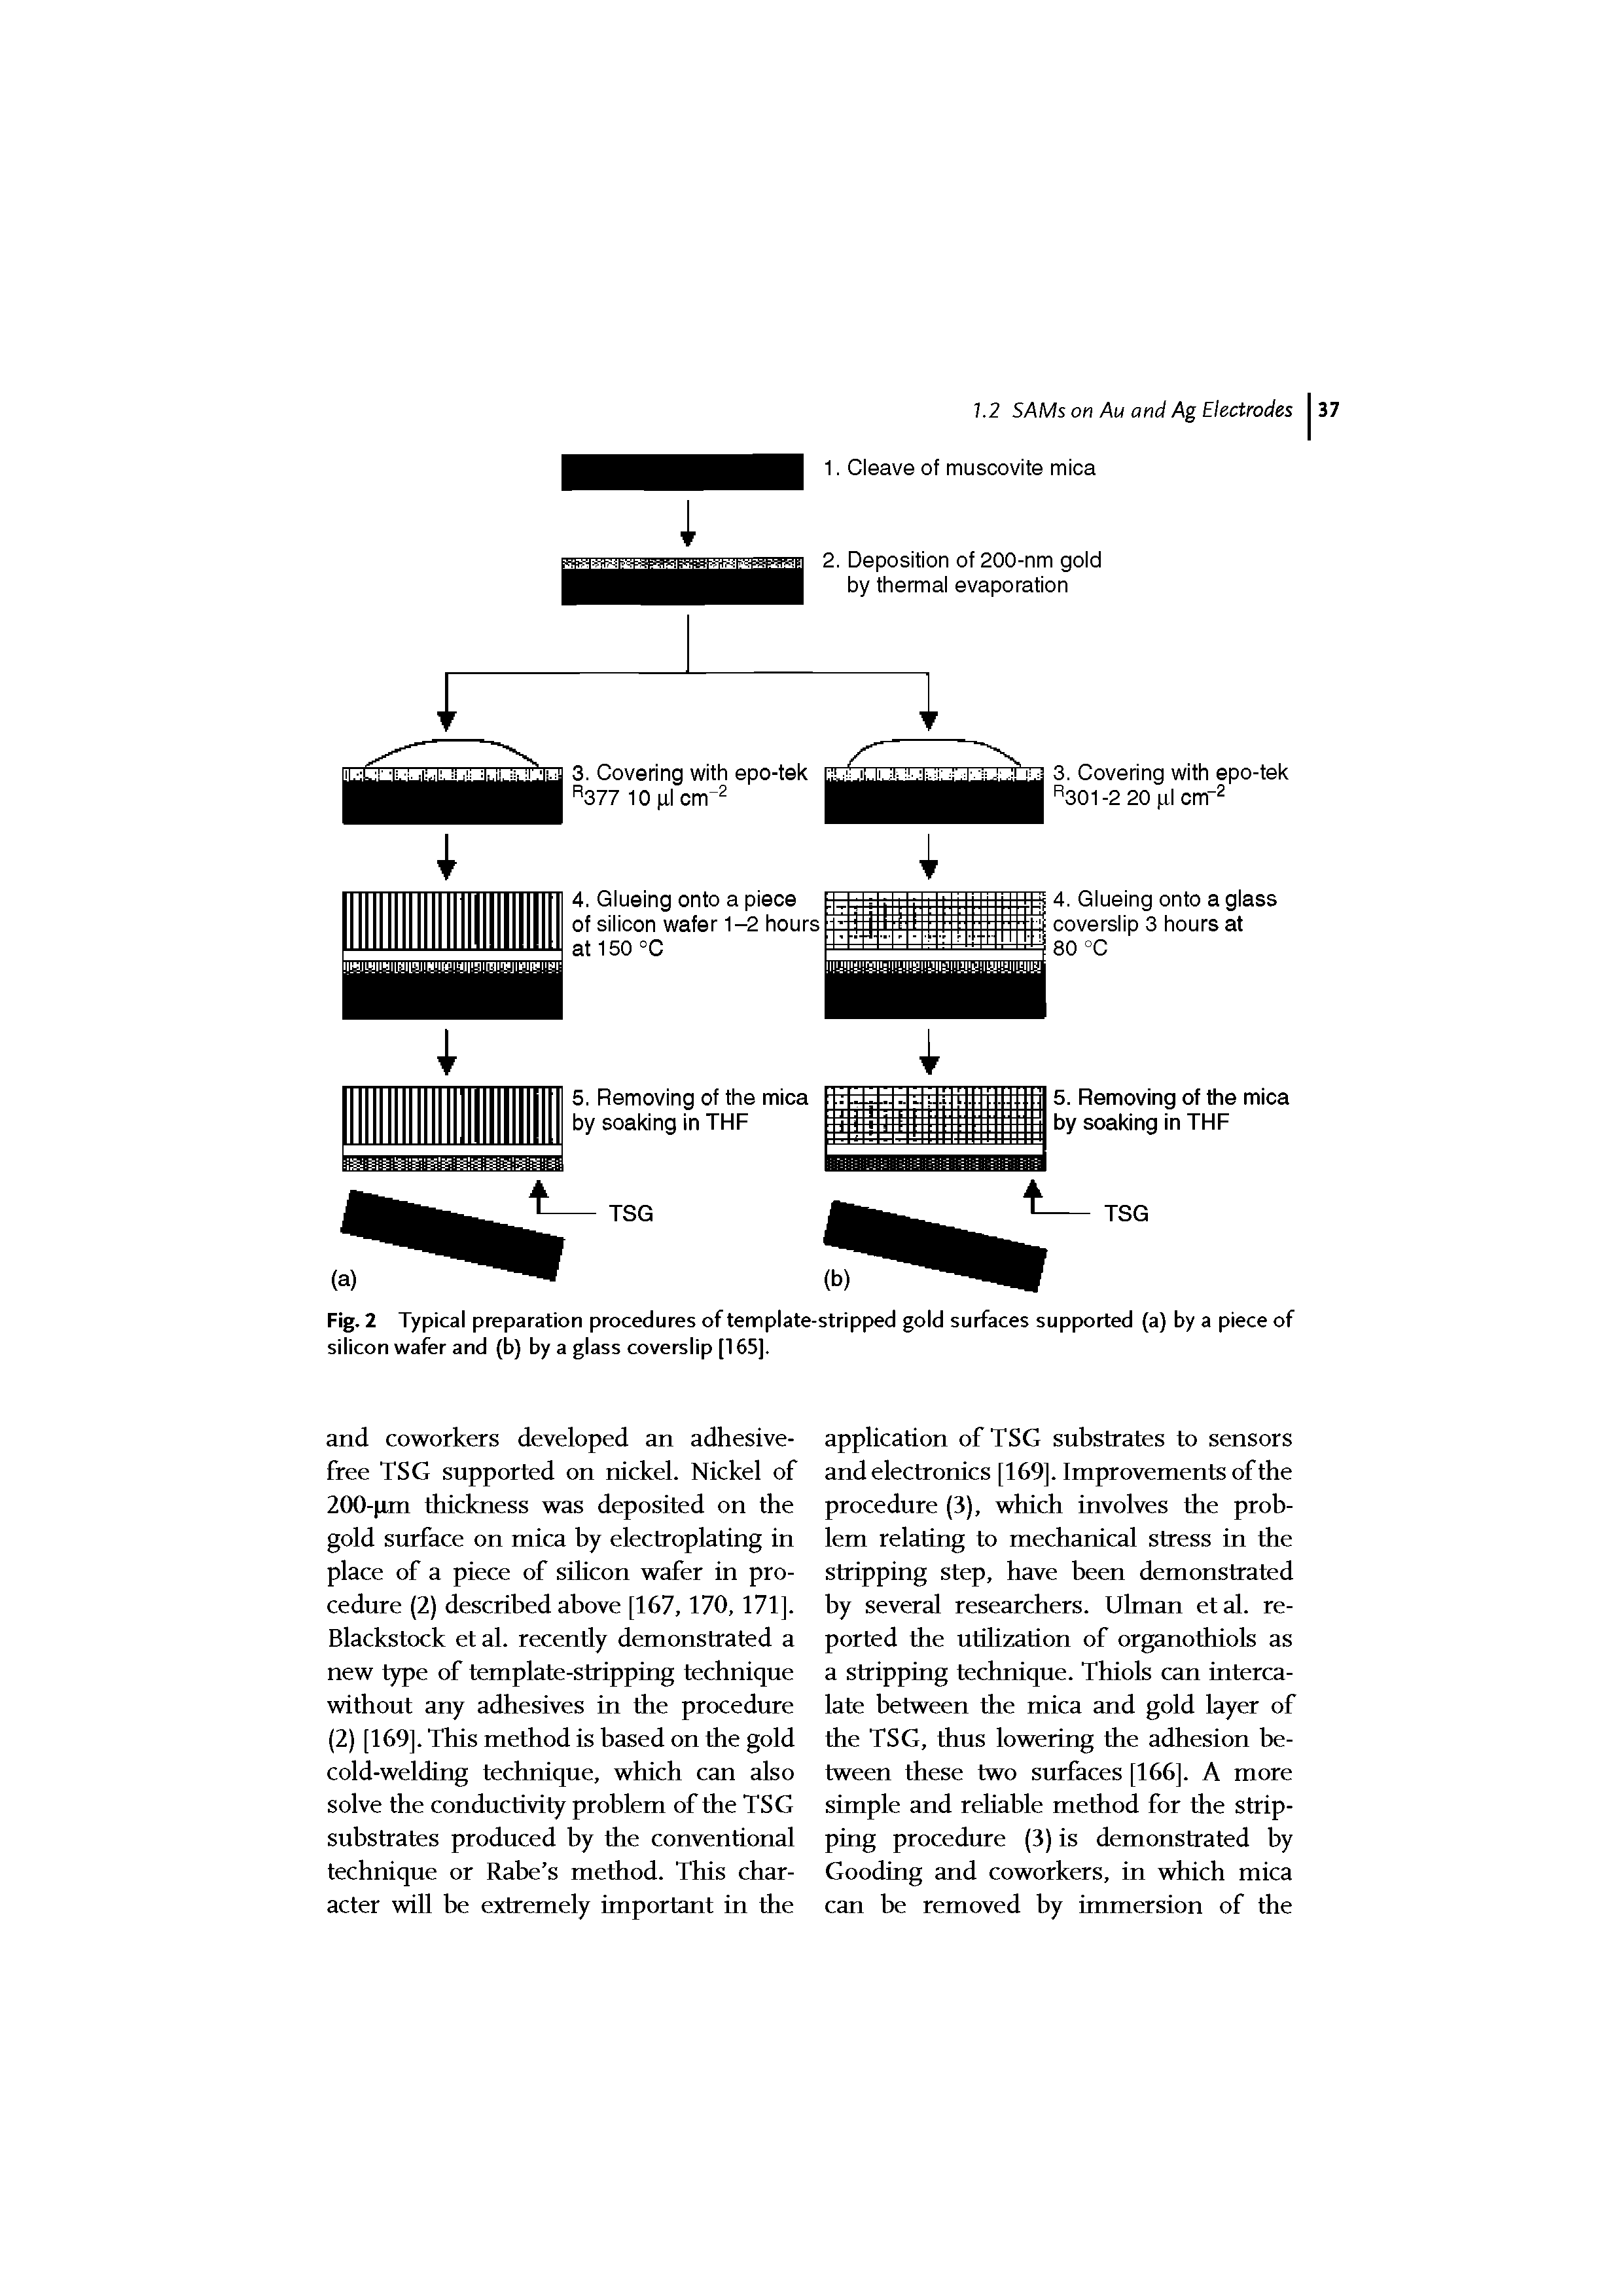 Fig. 2 Typical preparation procedures of template-stripped gold surfaces supported (a) by a piece of silicon wafer and (b) by a glass coverslip [165].